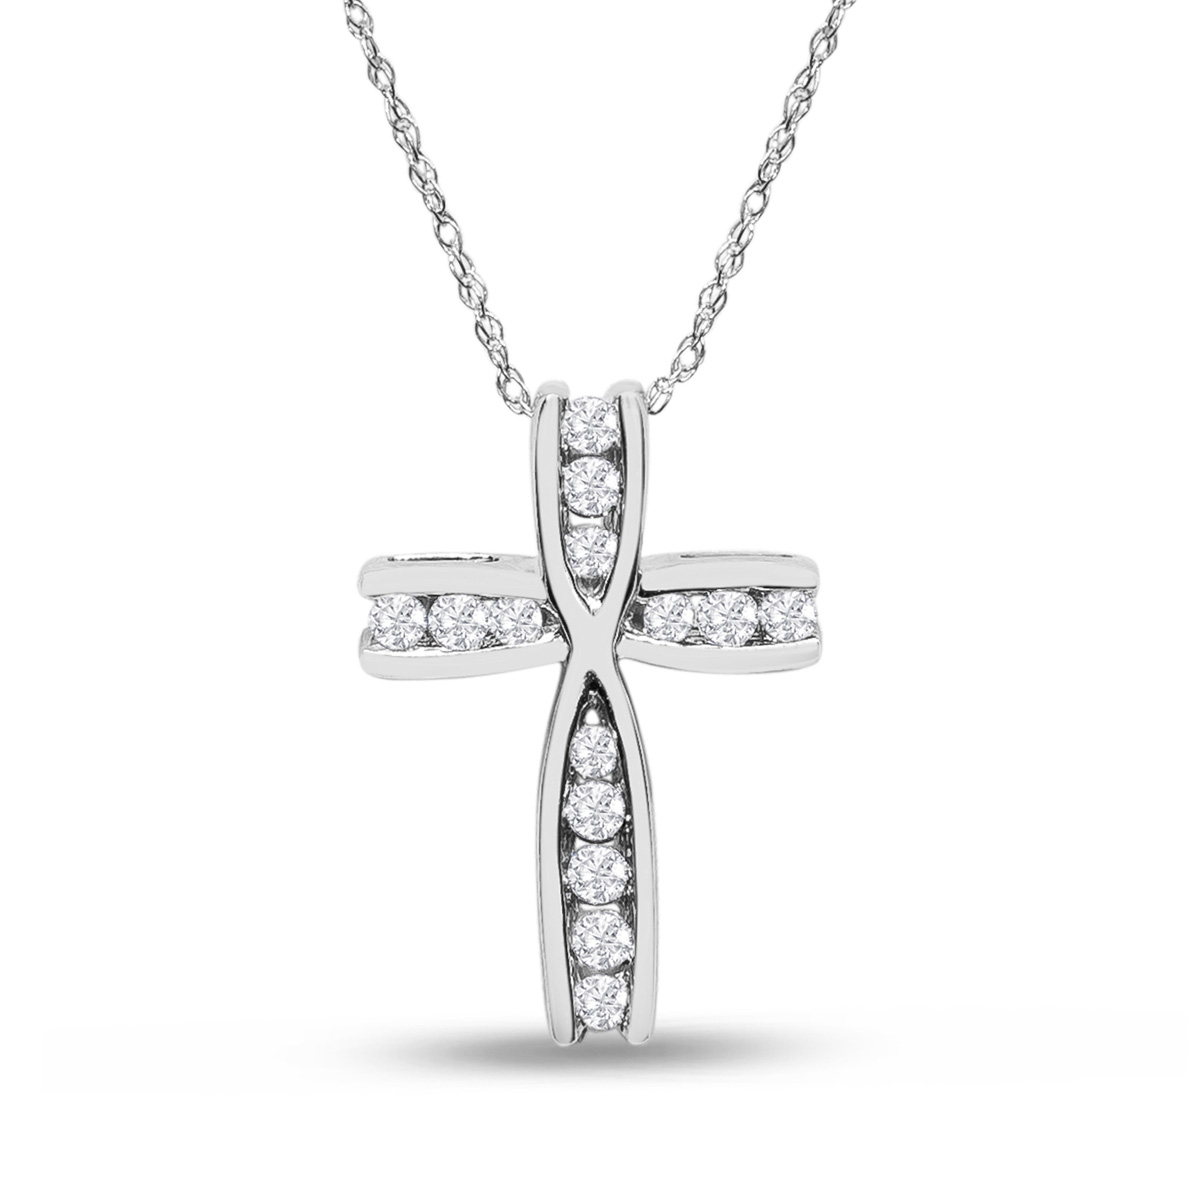 1/4 Carat Diamond Cross Necklace in White Gold (2.0 g), 18 Inches (, I1-I2) by SuperJeweler